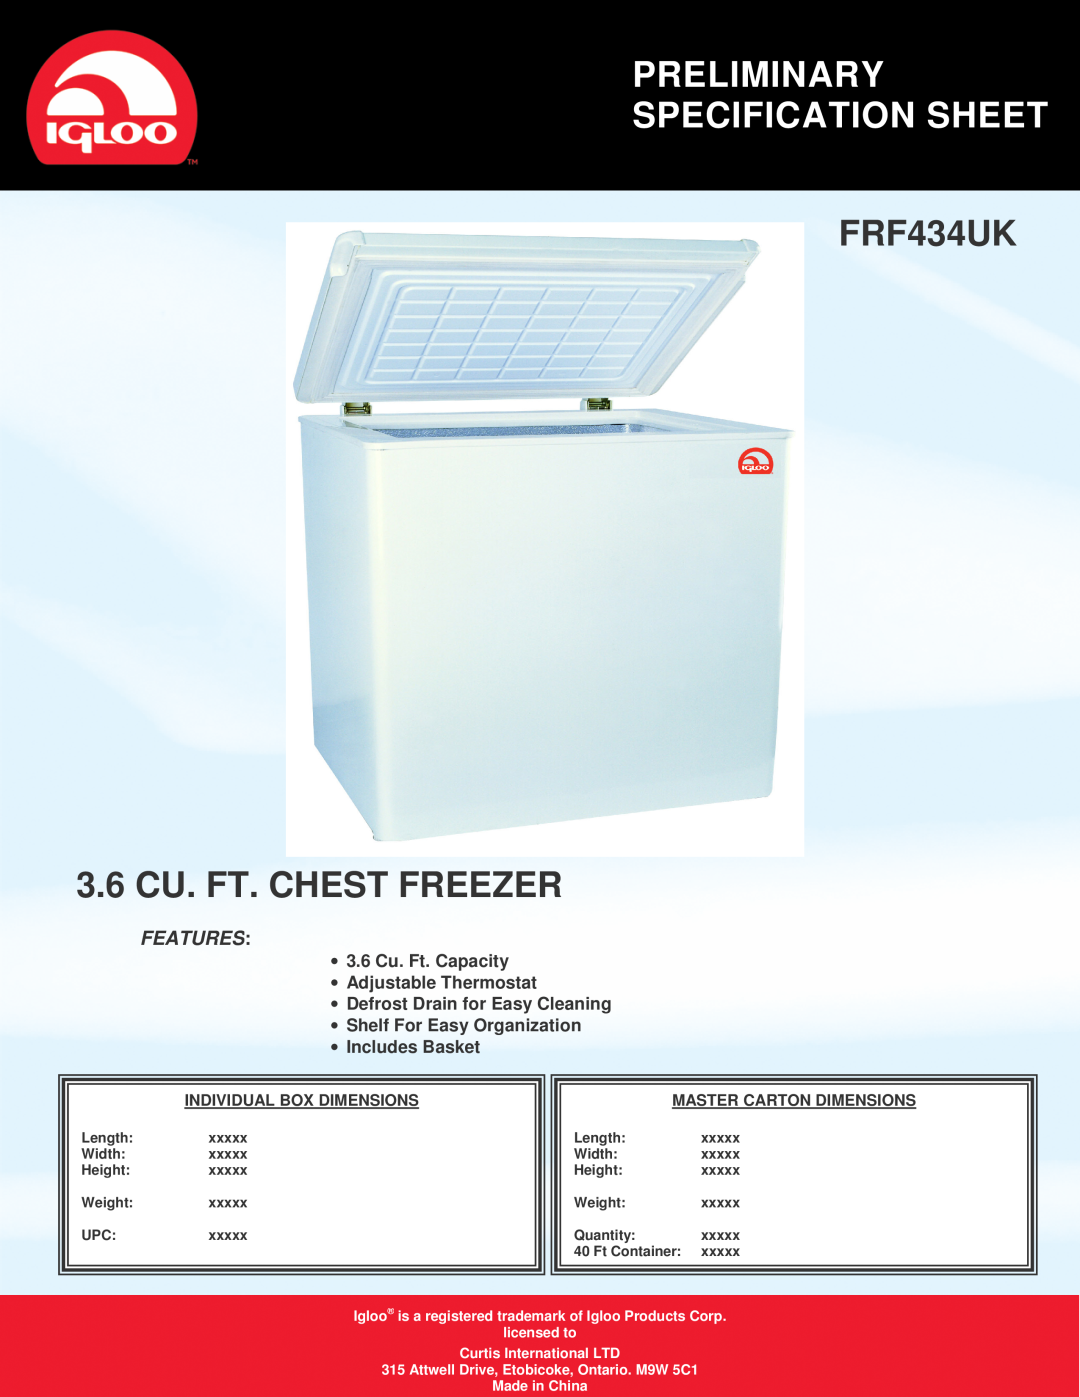 Curtis specifications Preliminary Specification Sheet, FRF434UK 3.6 CU. FT. CHEST FREEZER, Features, Made in China 